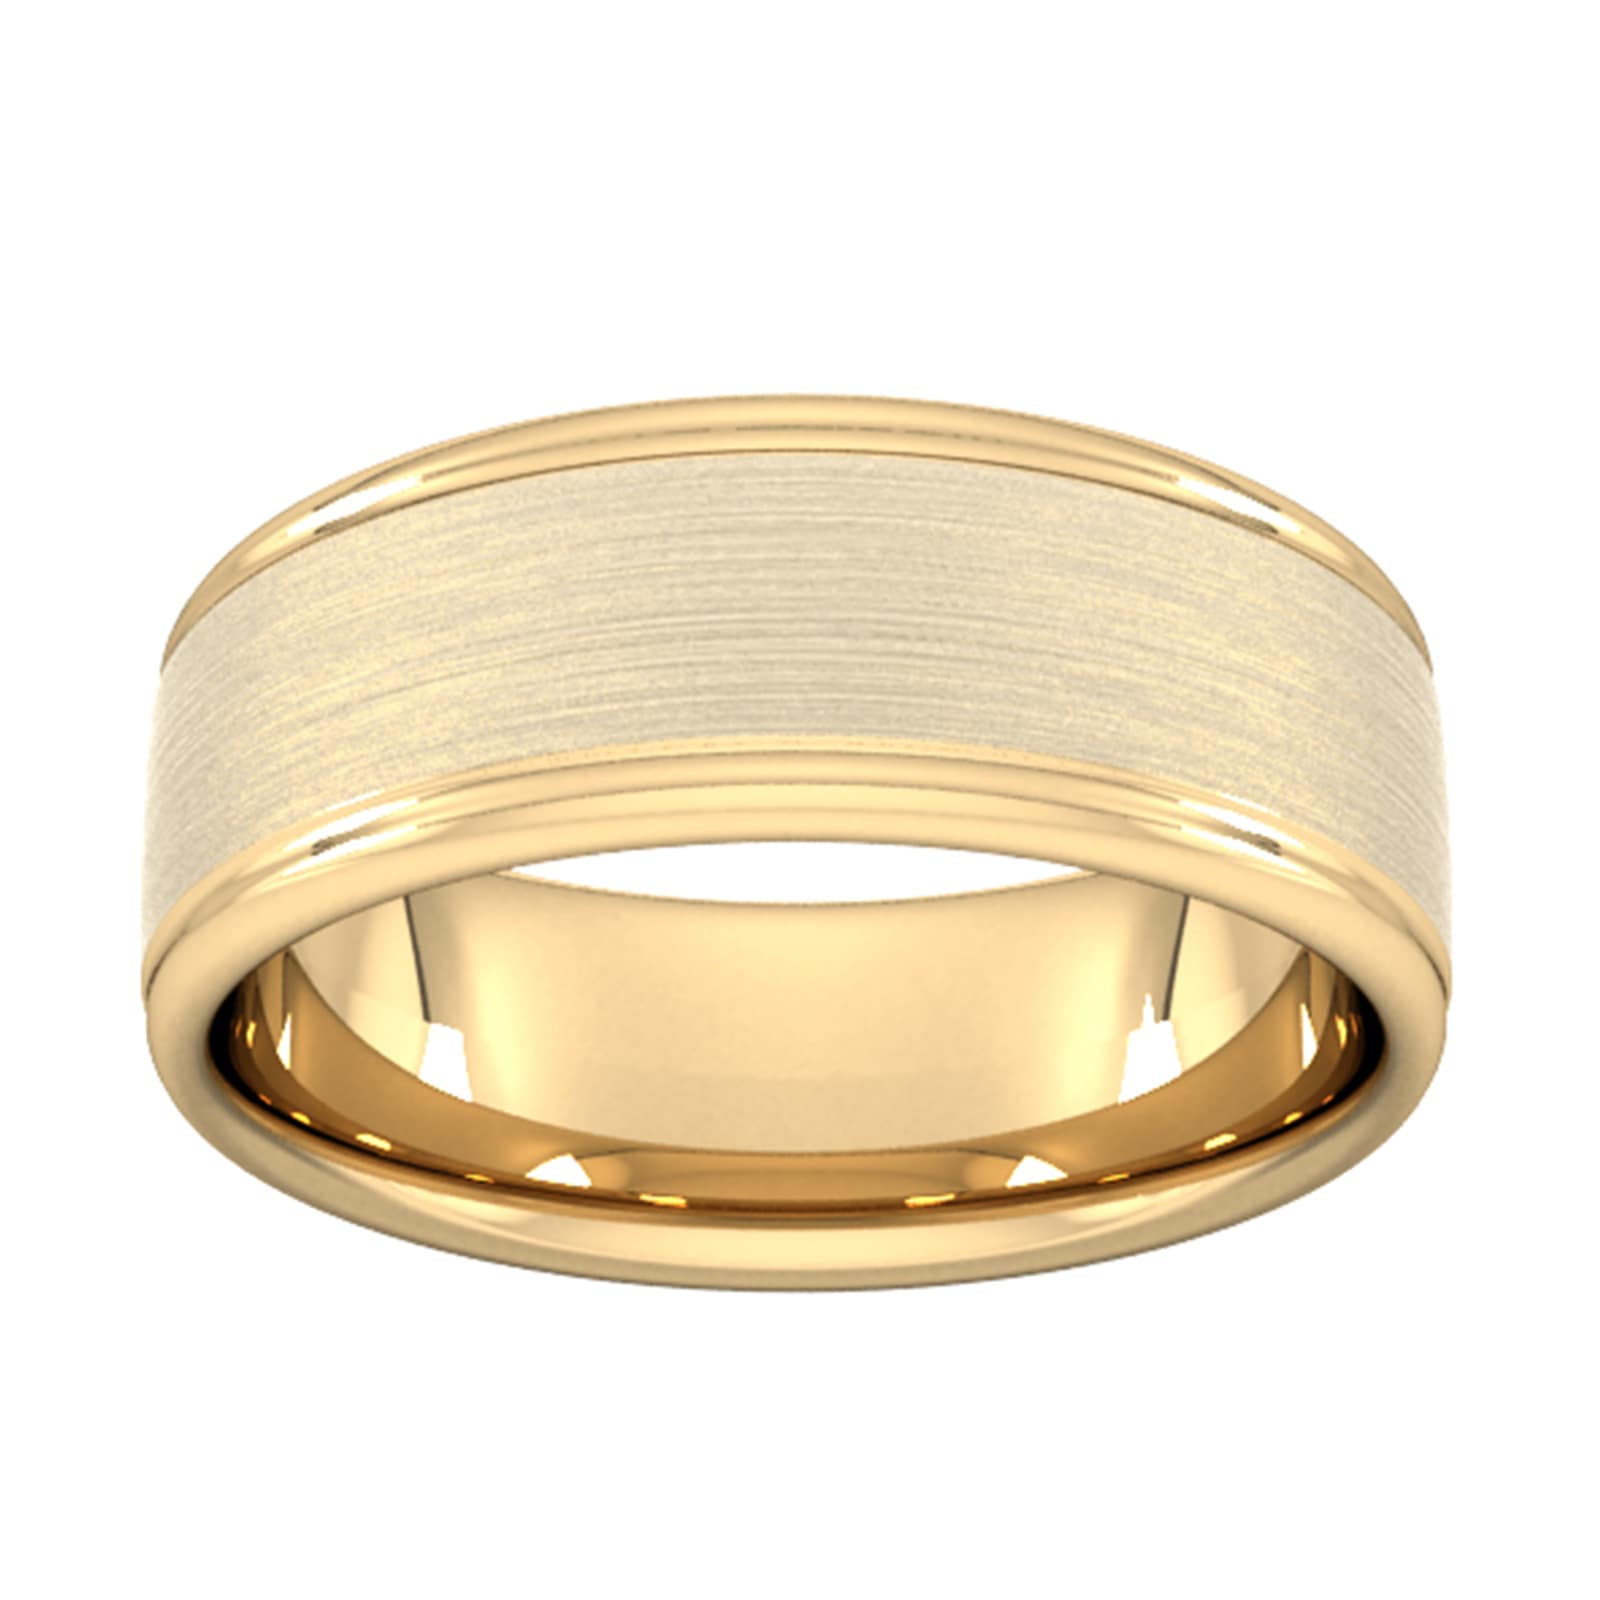 8mm D Shape Standard Matt Centre With Grooves Wedding Ring In 18 Carat Yellow Gold - Ring Size S